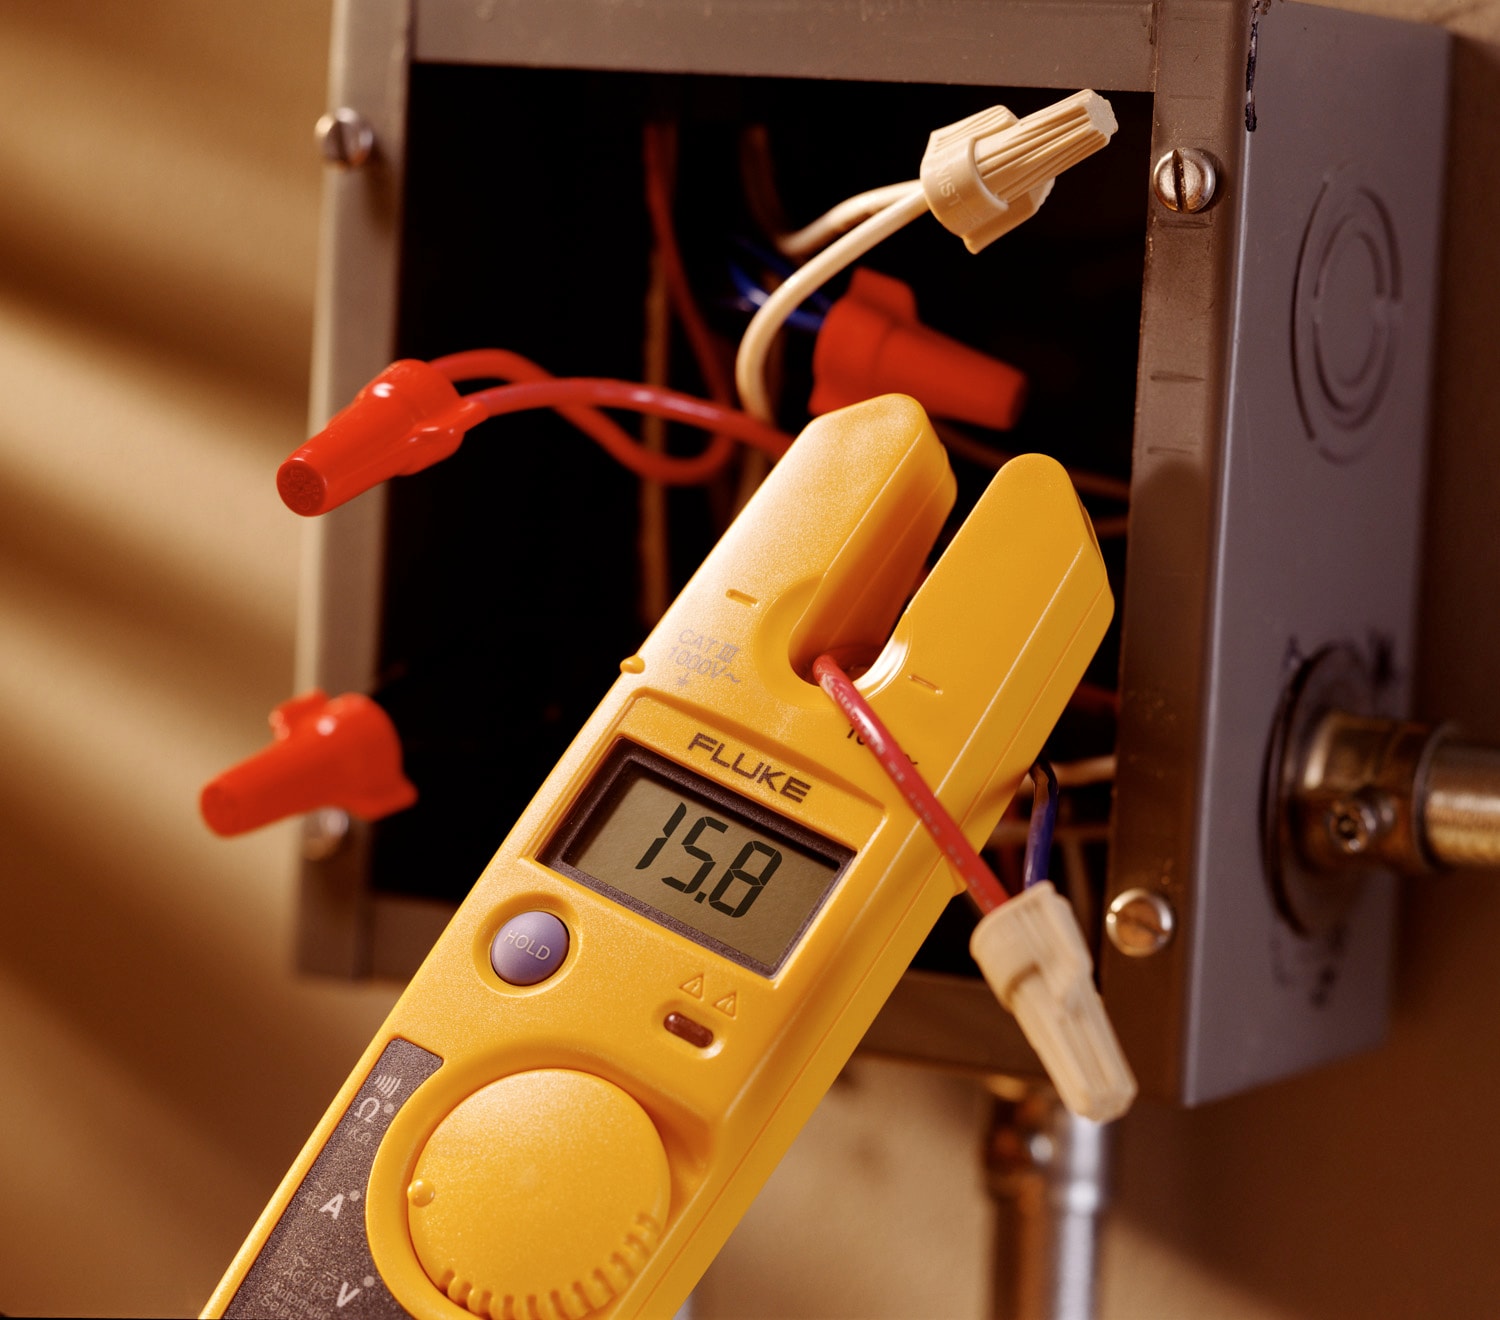 Fluke, Voltage, Continuity and Current Tester, T5-1000